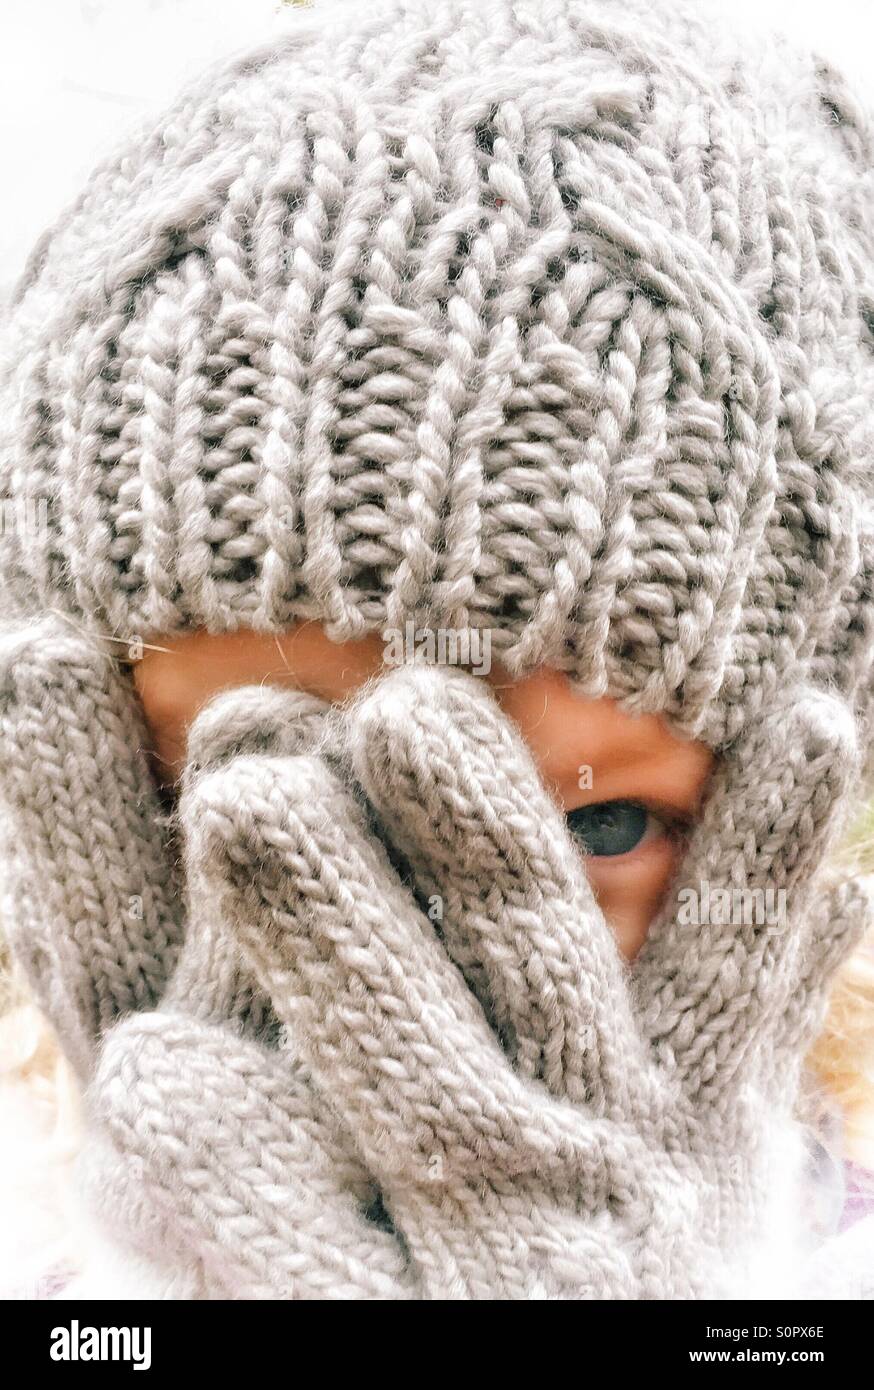 Young girl peeping out between gloved hands Stock Photo